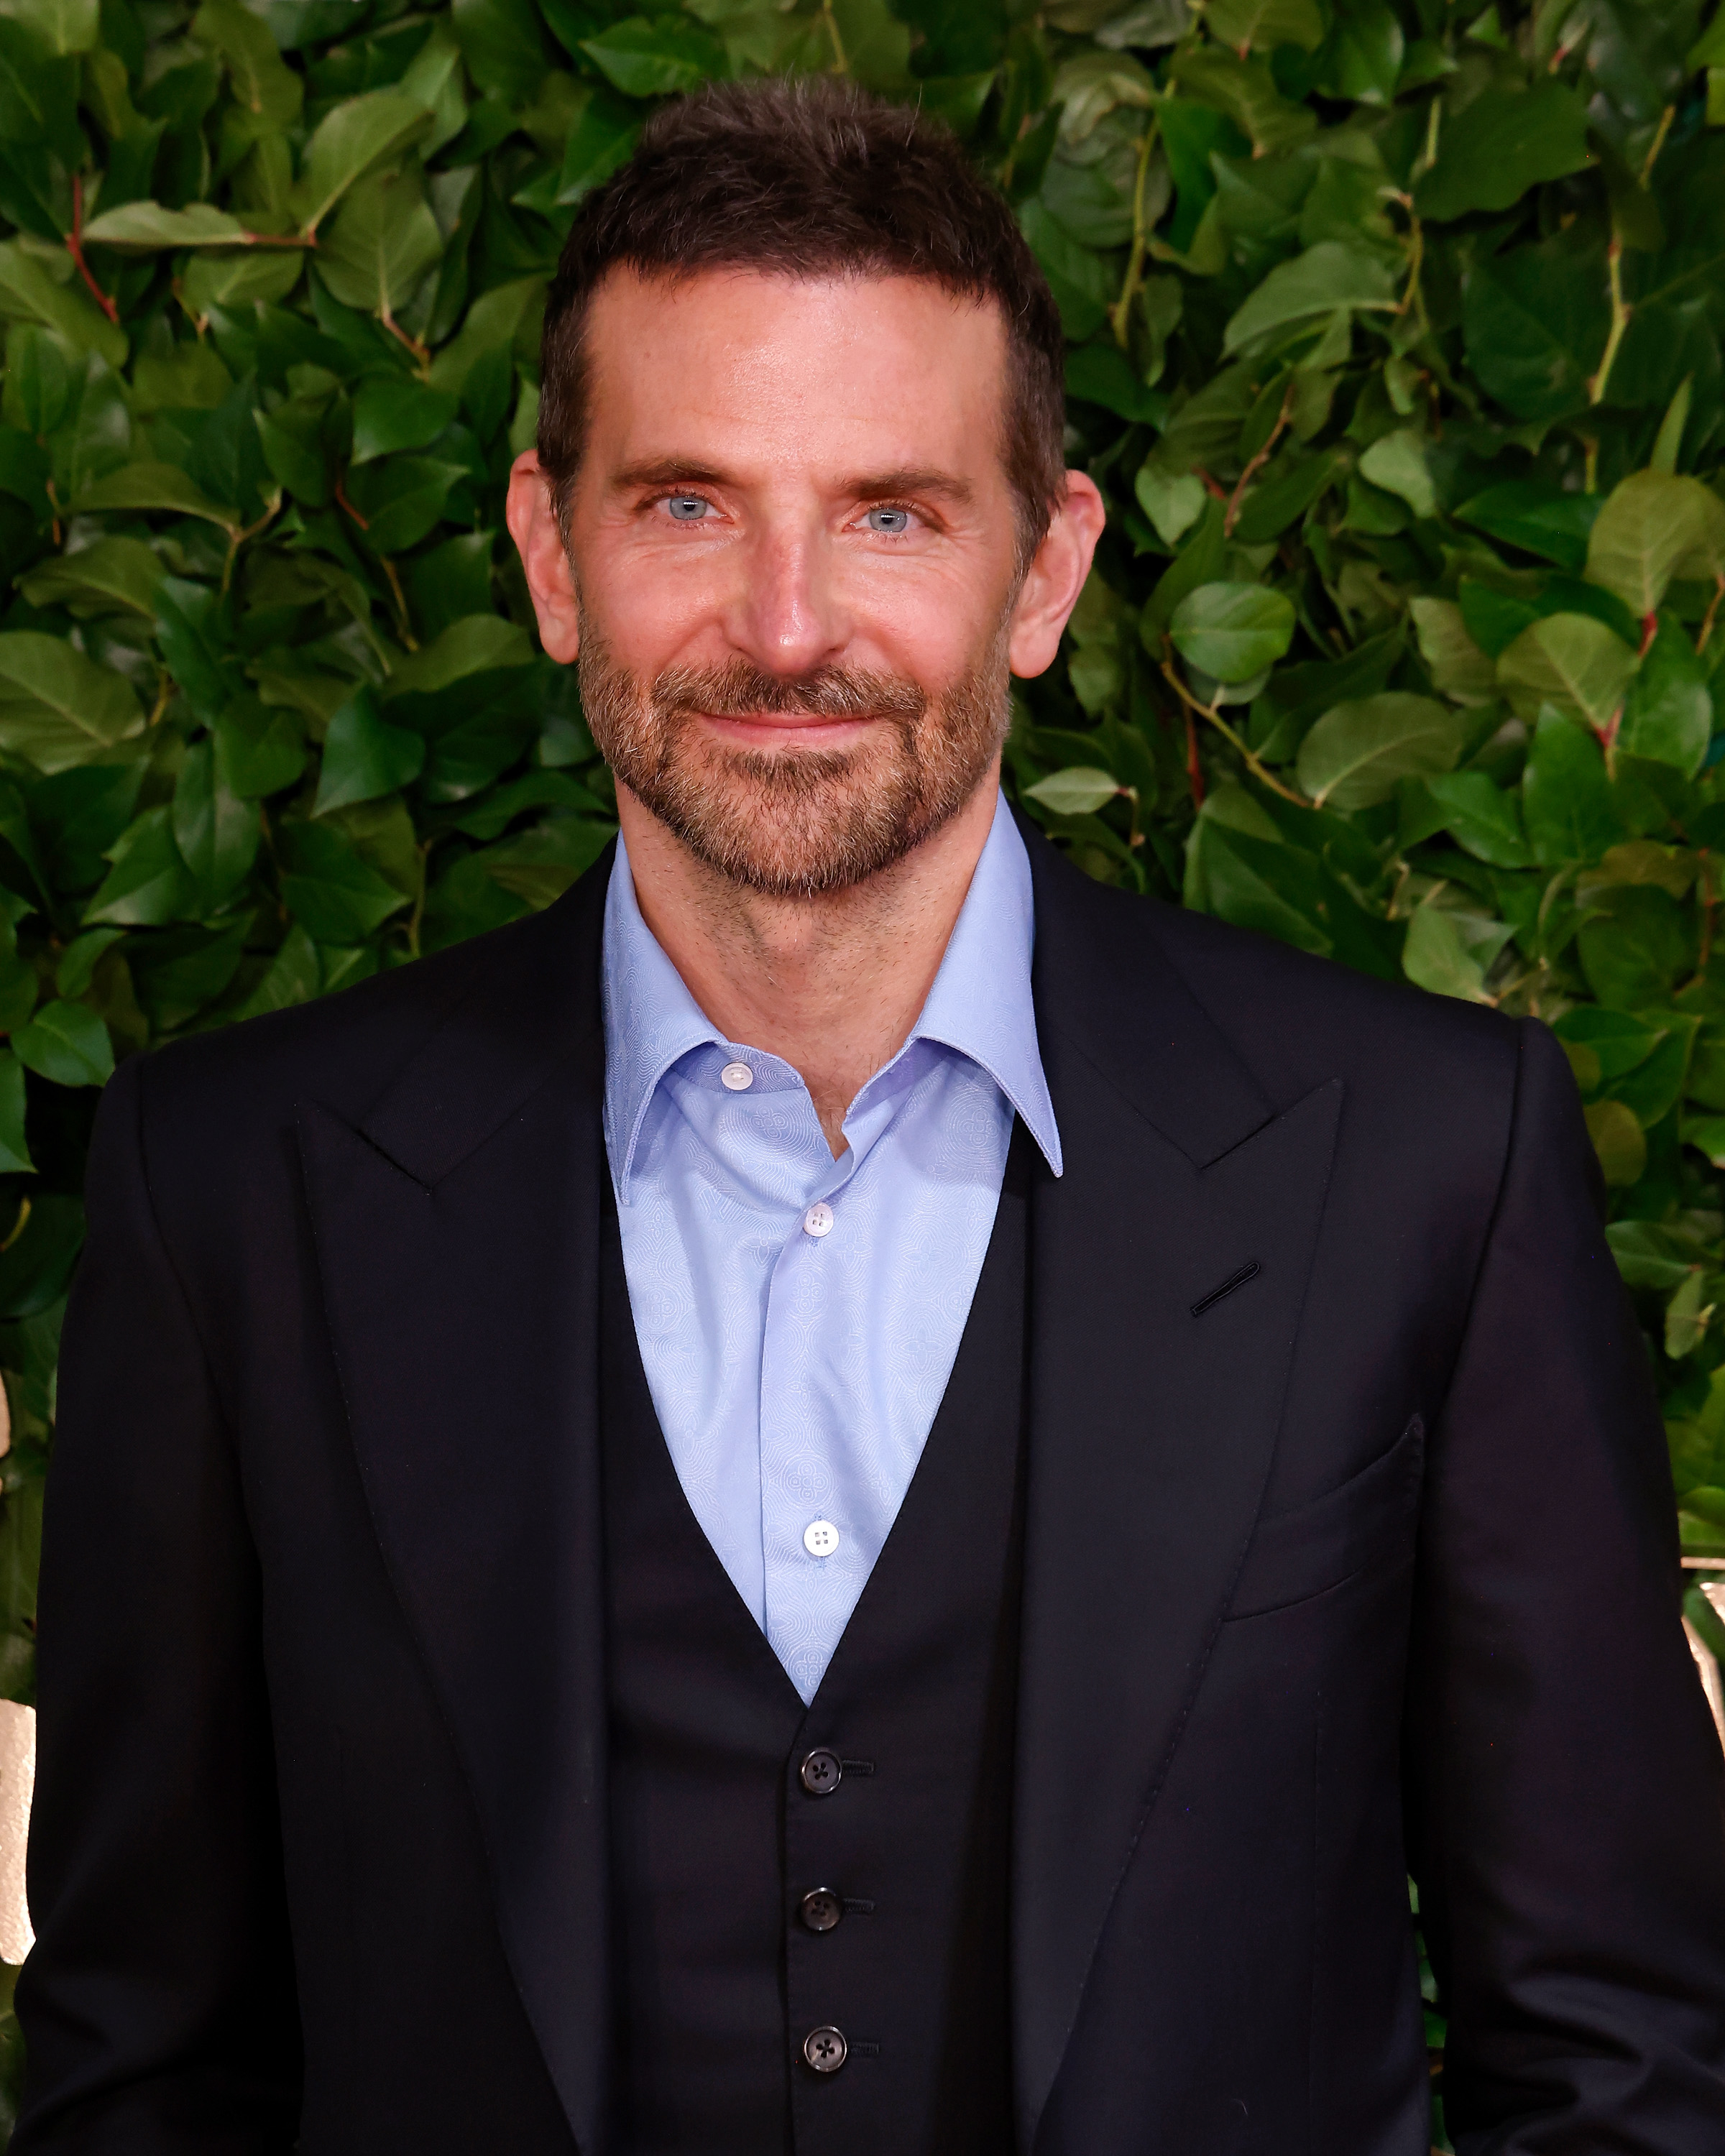 Bradley in a casual suit at a media event